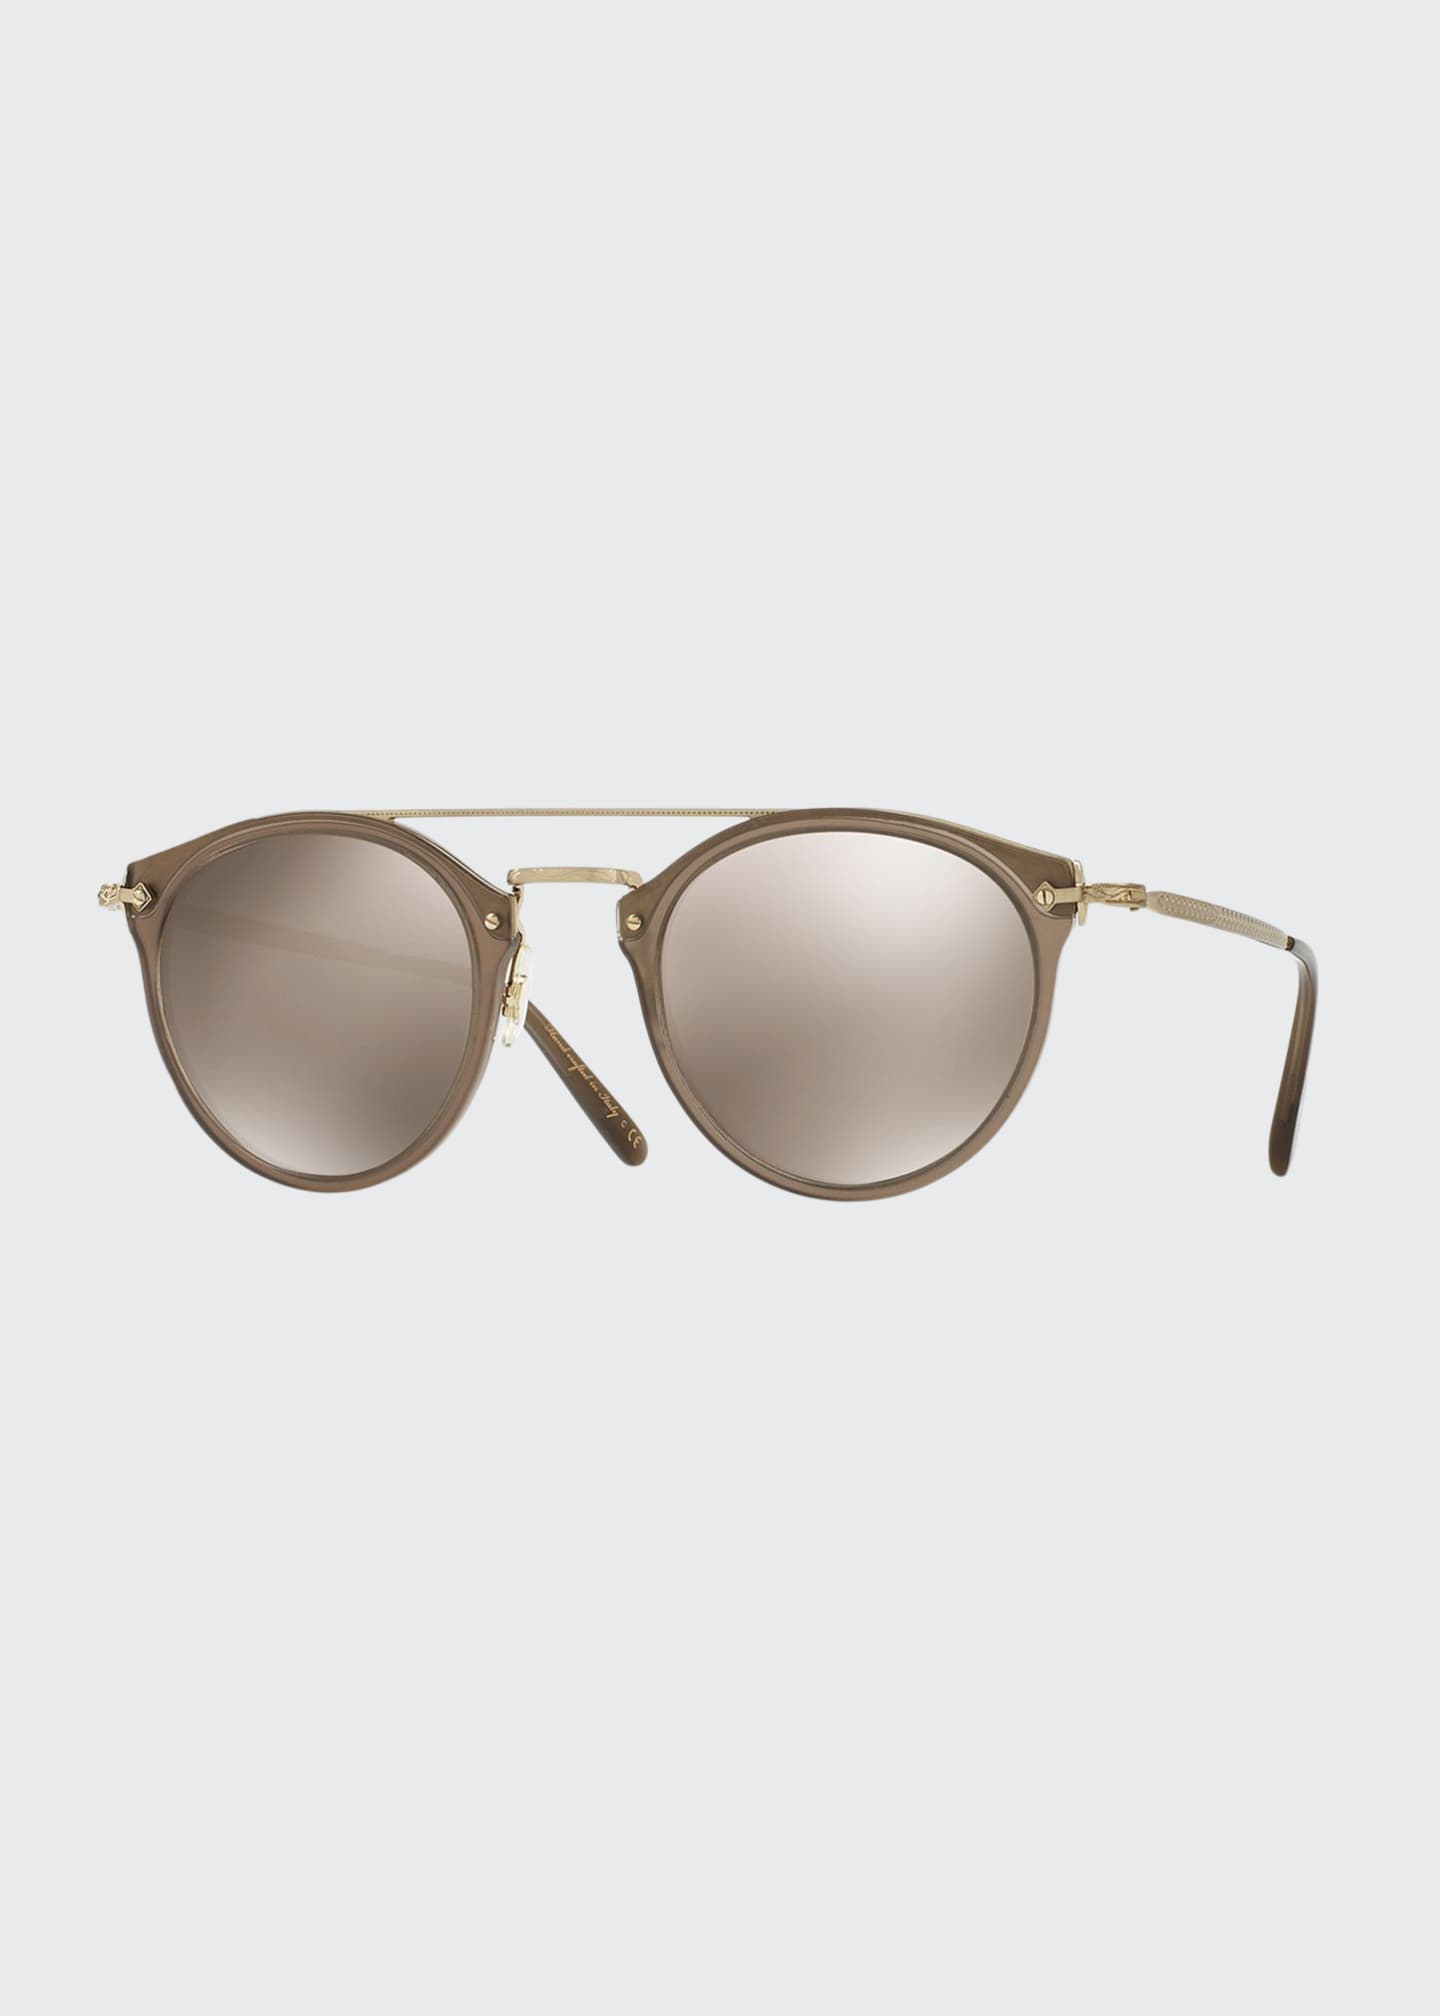 Oliver Peoples Remick Mirrored Brow-Bar Sunglasses, Taupe - Bergdorf ...